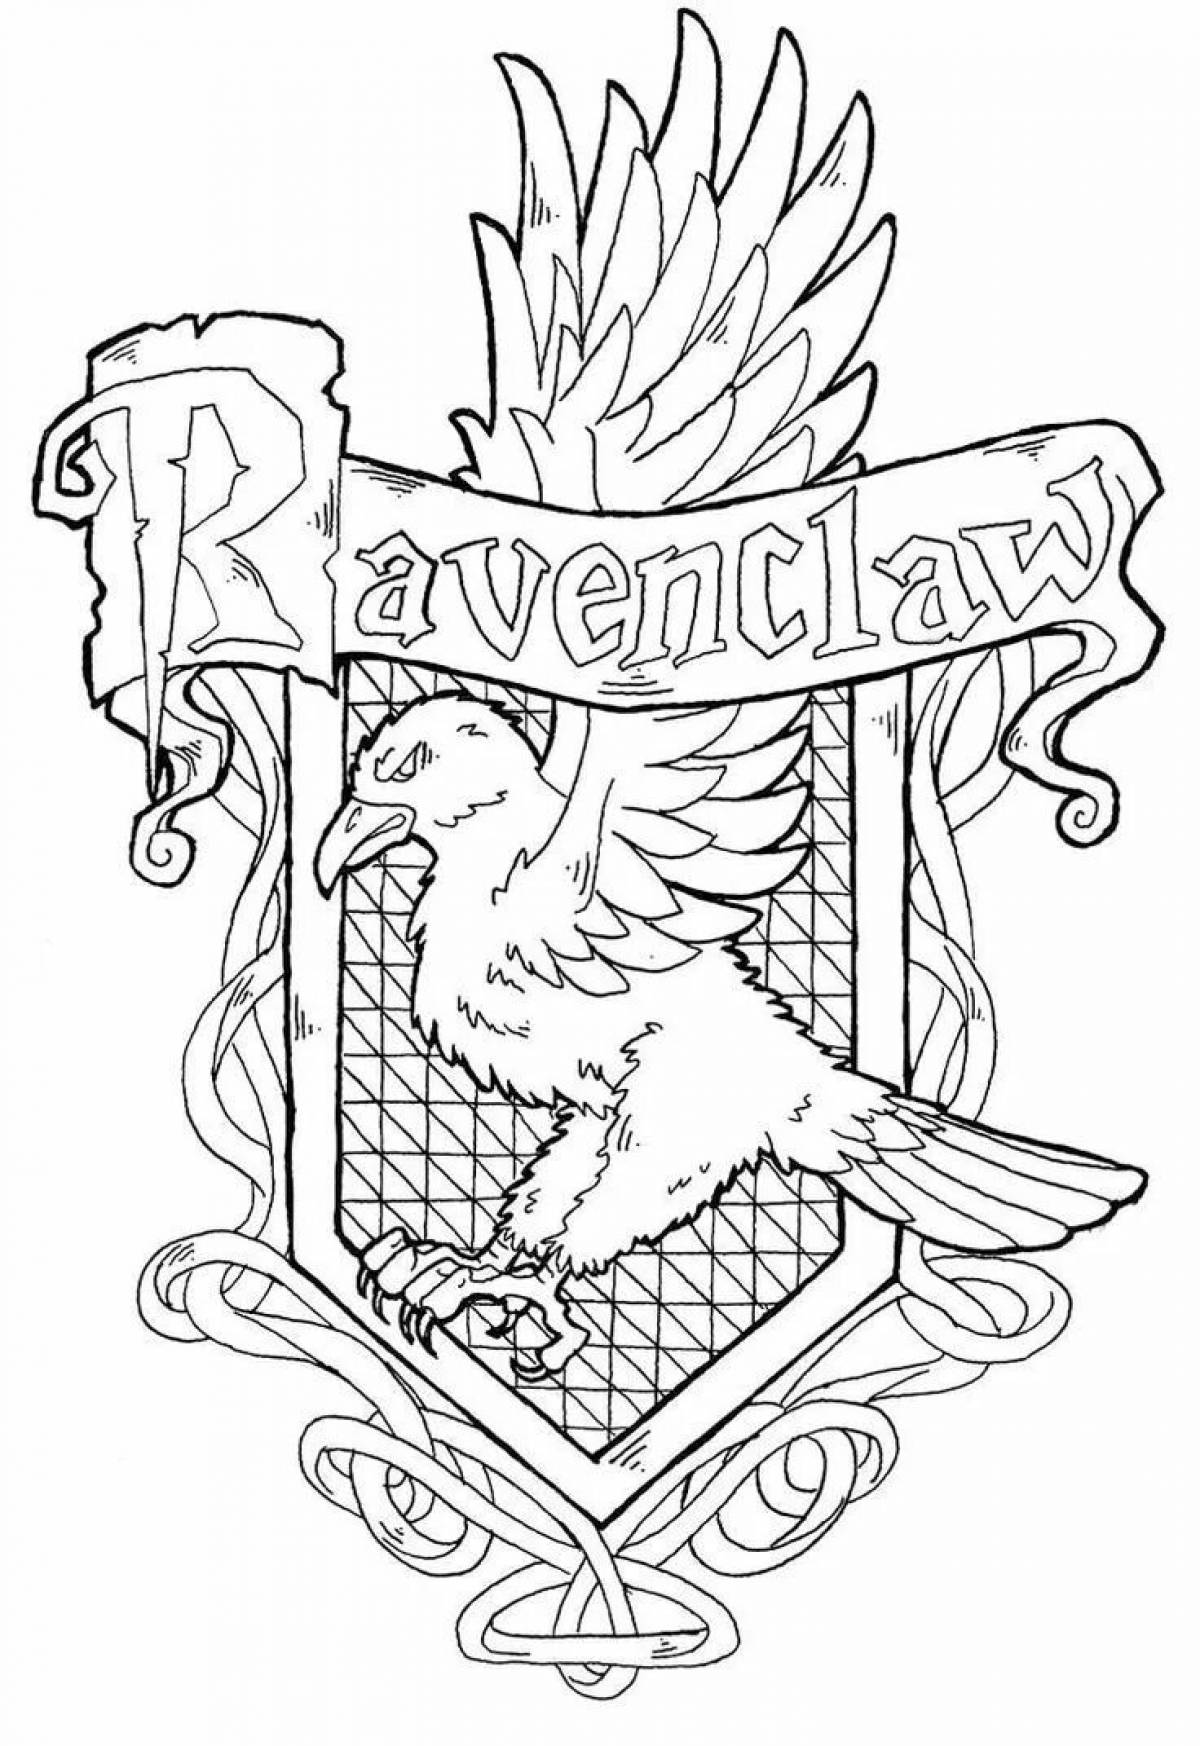 Ravenclaw coat of arms #2